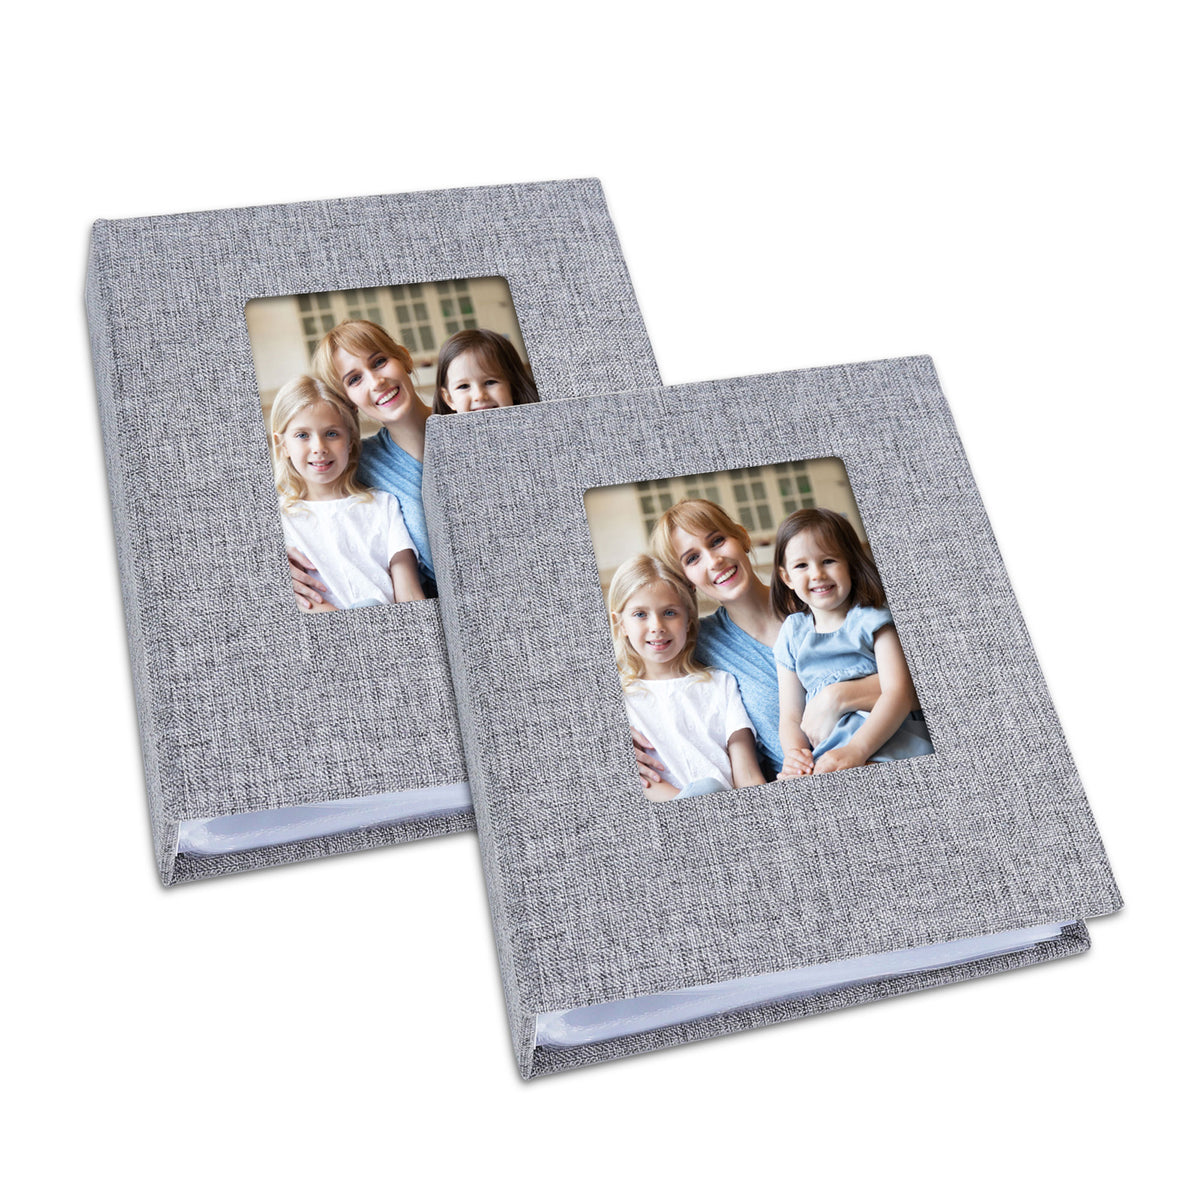  5x7 Photo Album Hold 52 Pictures - 2 Pack, Small Photo Album  5x7, Photo Album 5x7, Mini Photo Album for 5x7 Pictures, Artwork, Drawings,  Mini Picture Brag Books, PU Cover with